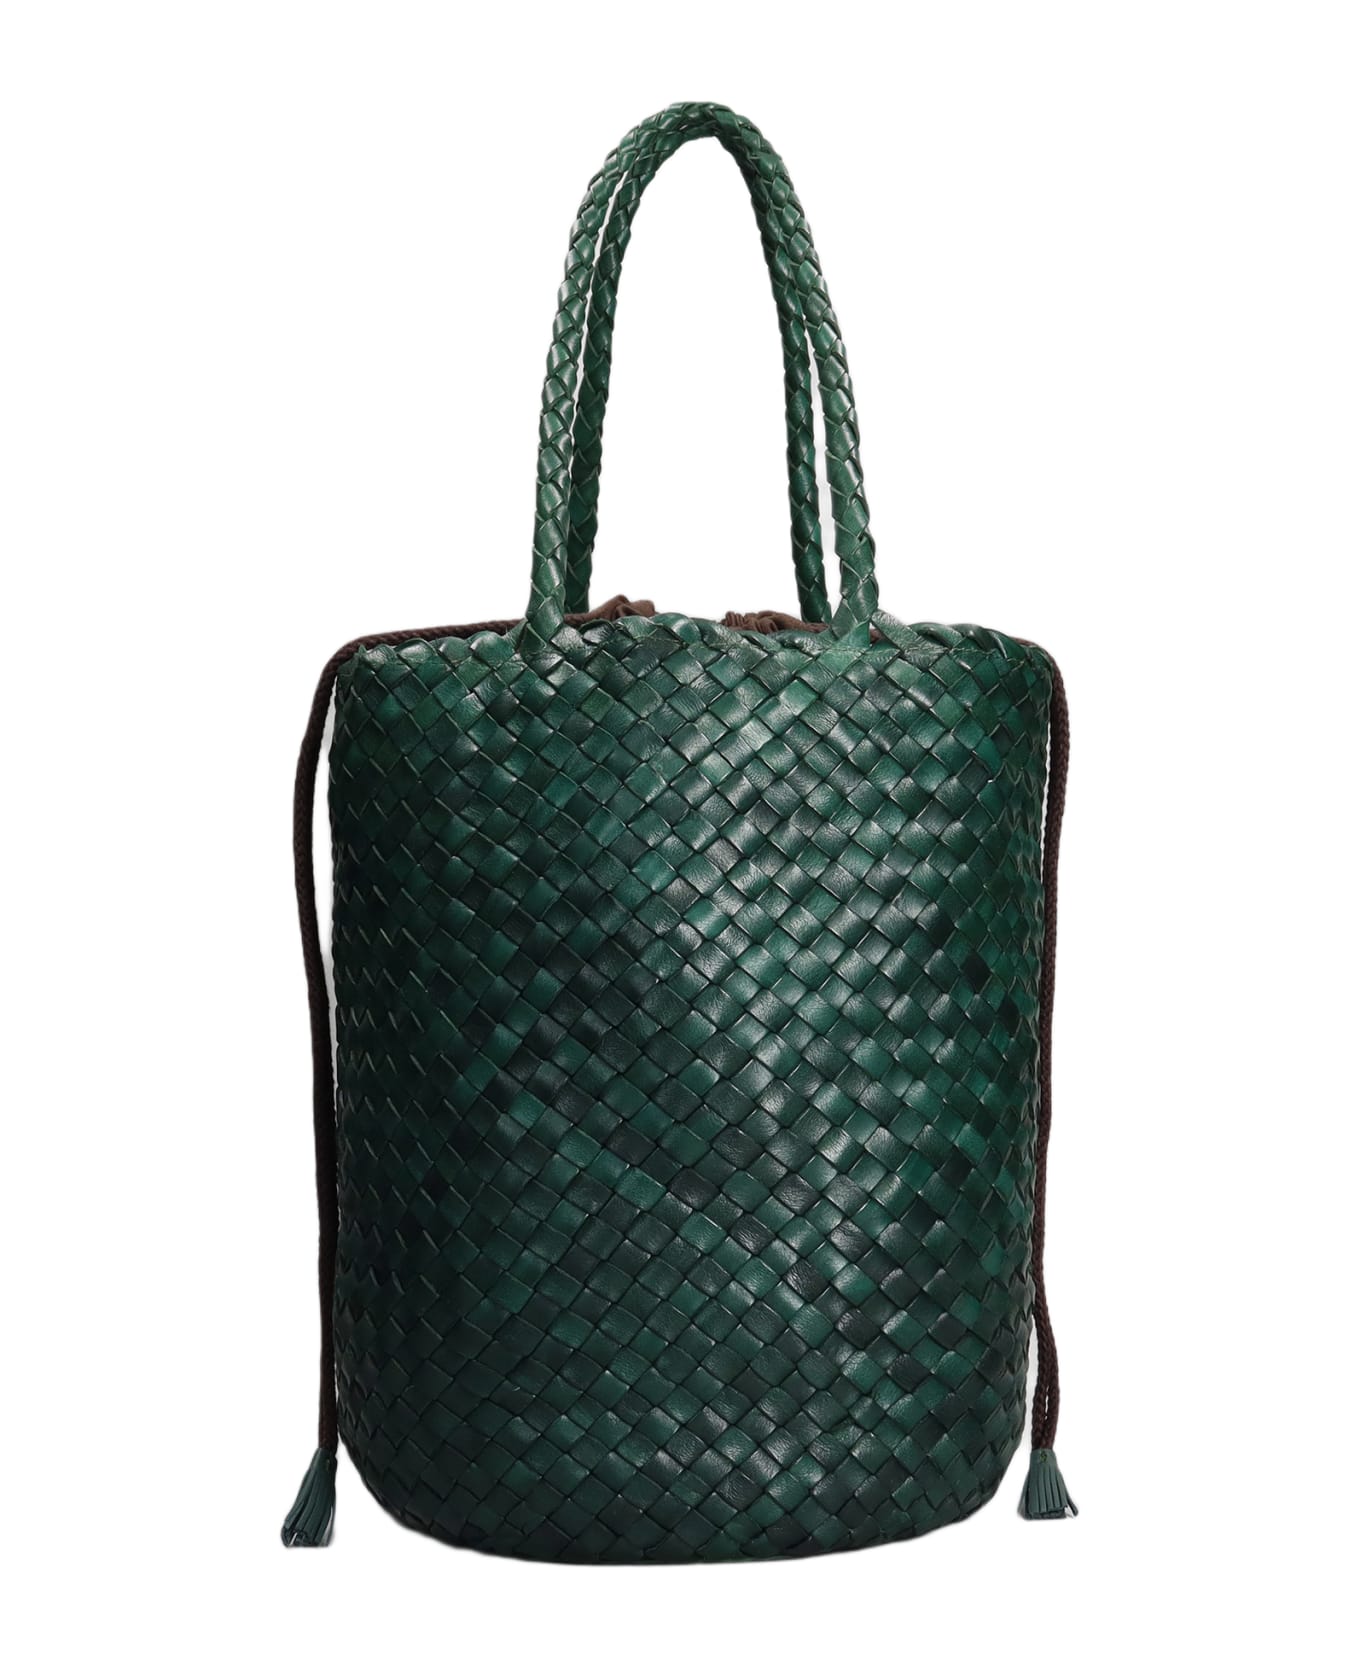 Dragon Diffusion Jacky Bucket Hand Bag In Green Leather - green